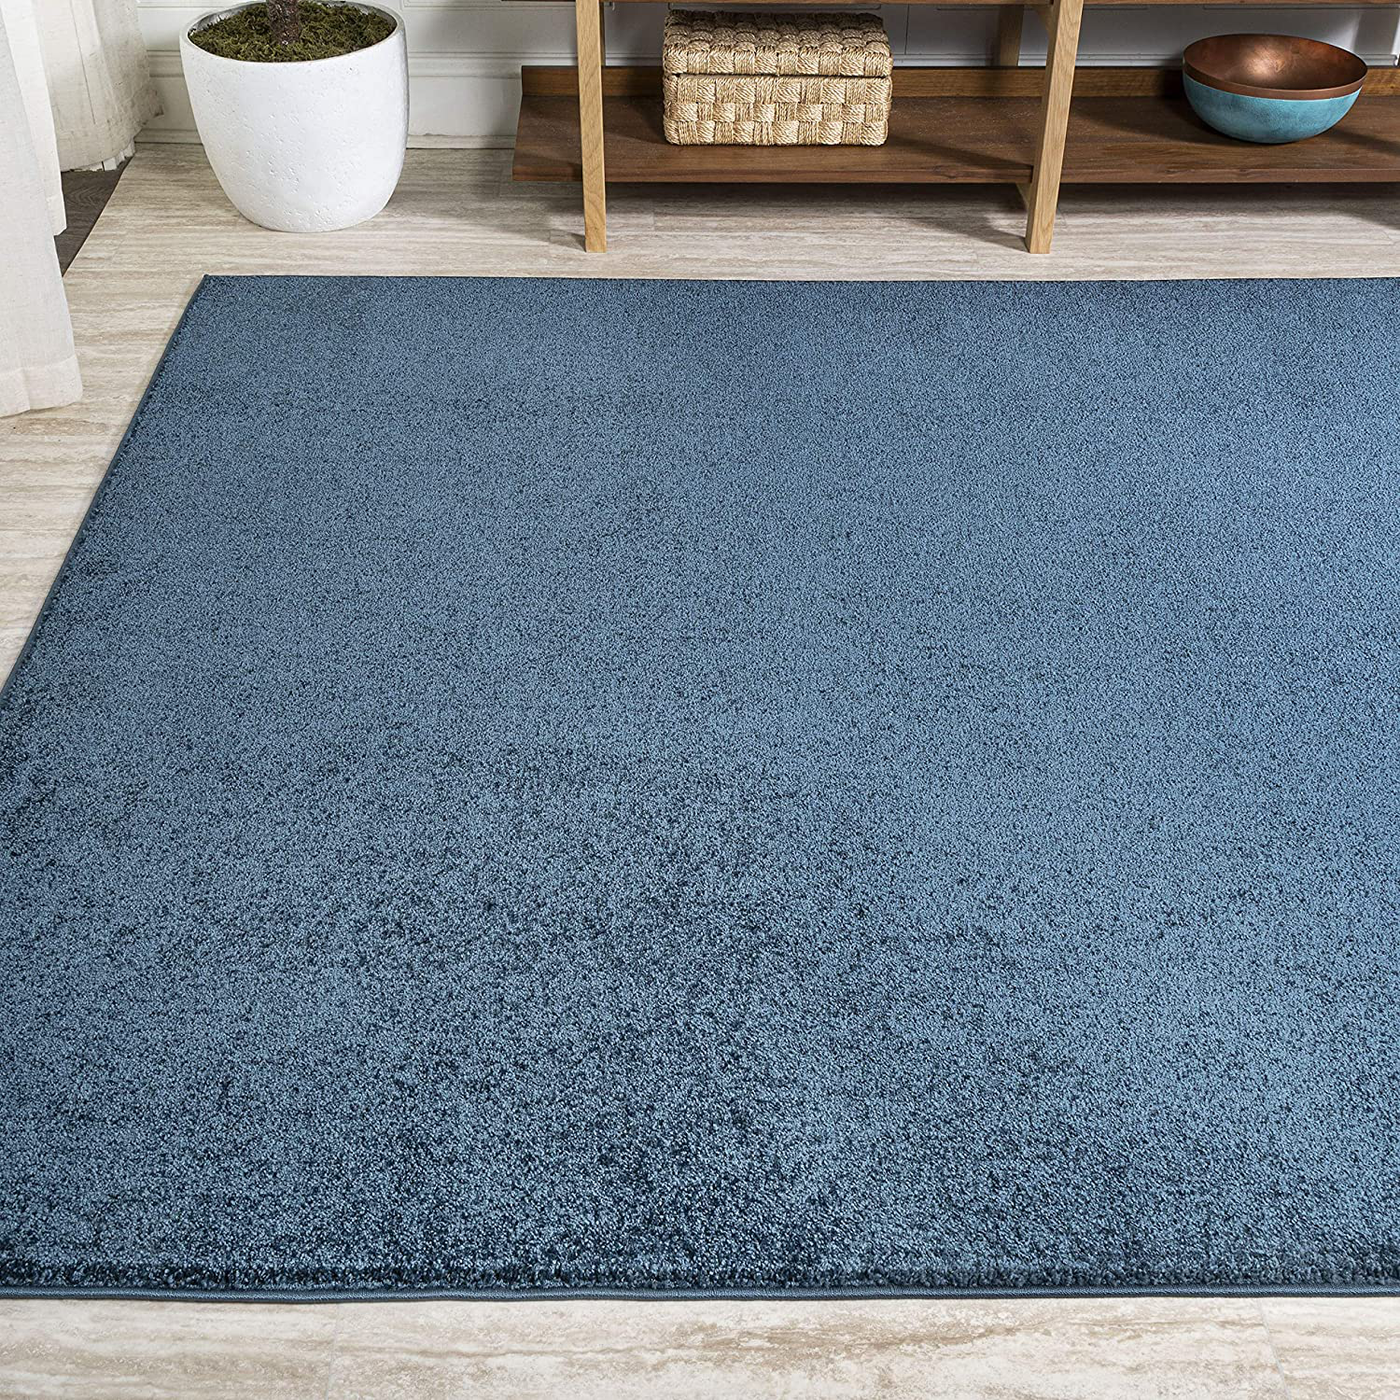 JONATHAN Y Haze Solid Low-Pile Turquoise 2 ft. x 10 ft. Runner Rug Casual, Contemporary, Solid, Traditional EasyCleaning,HighTraffic,LivingRoom, Non Shedding, SEU100H-210